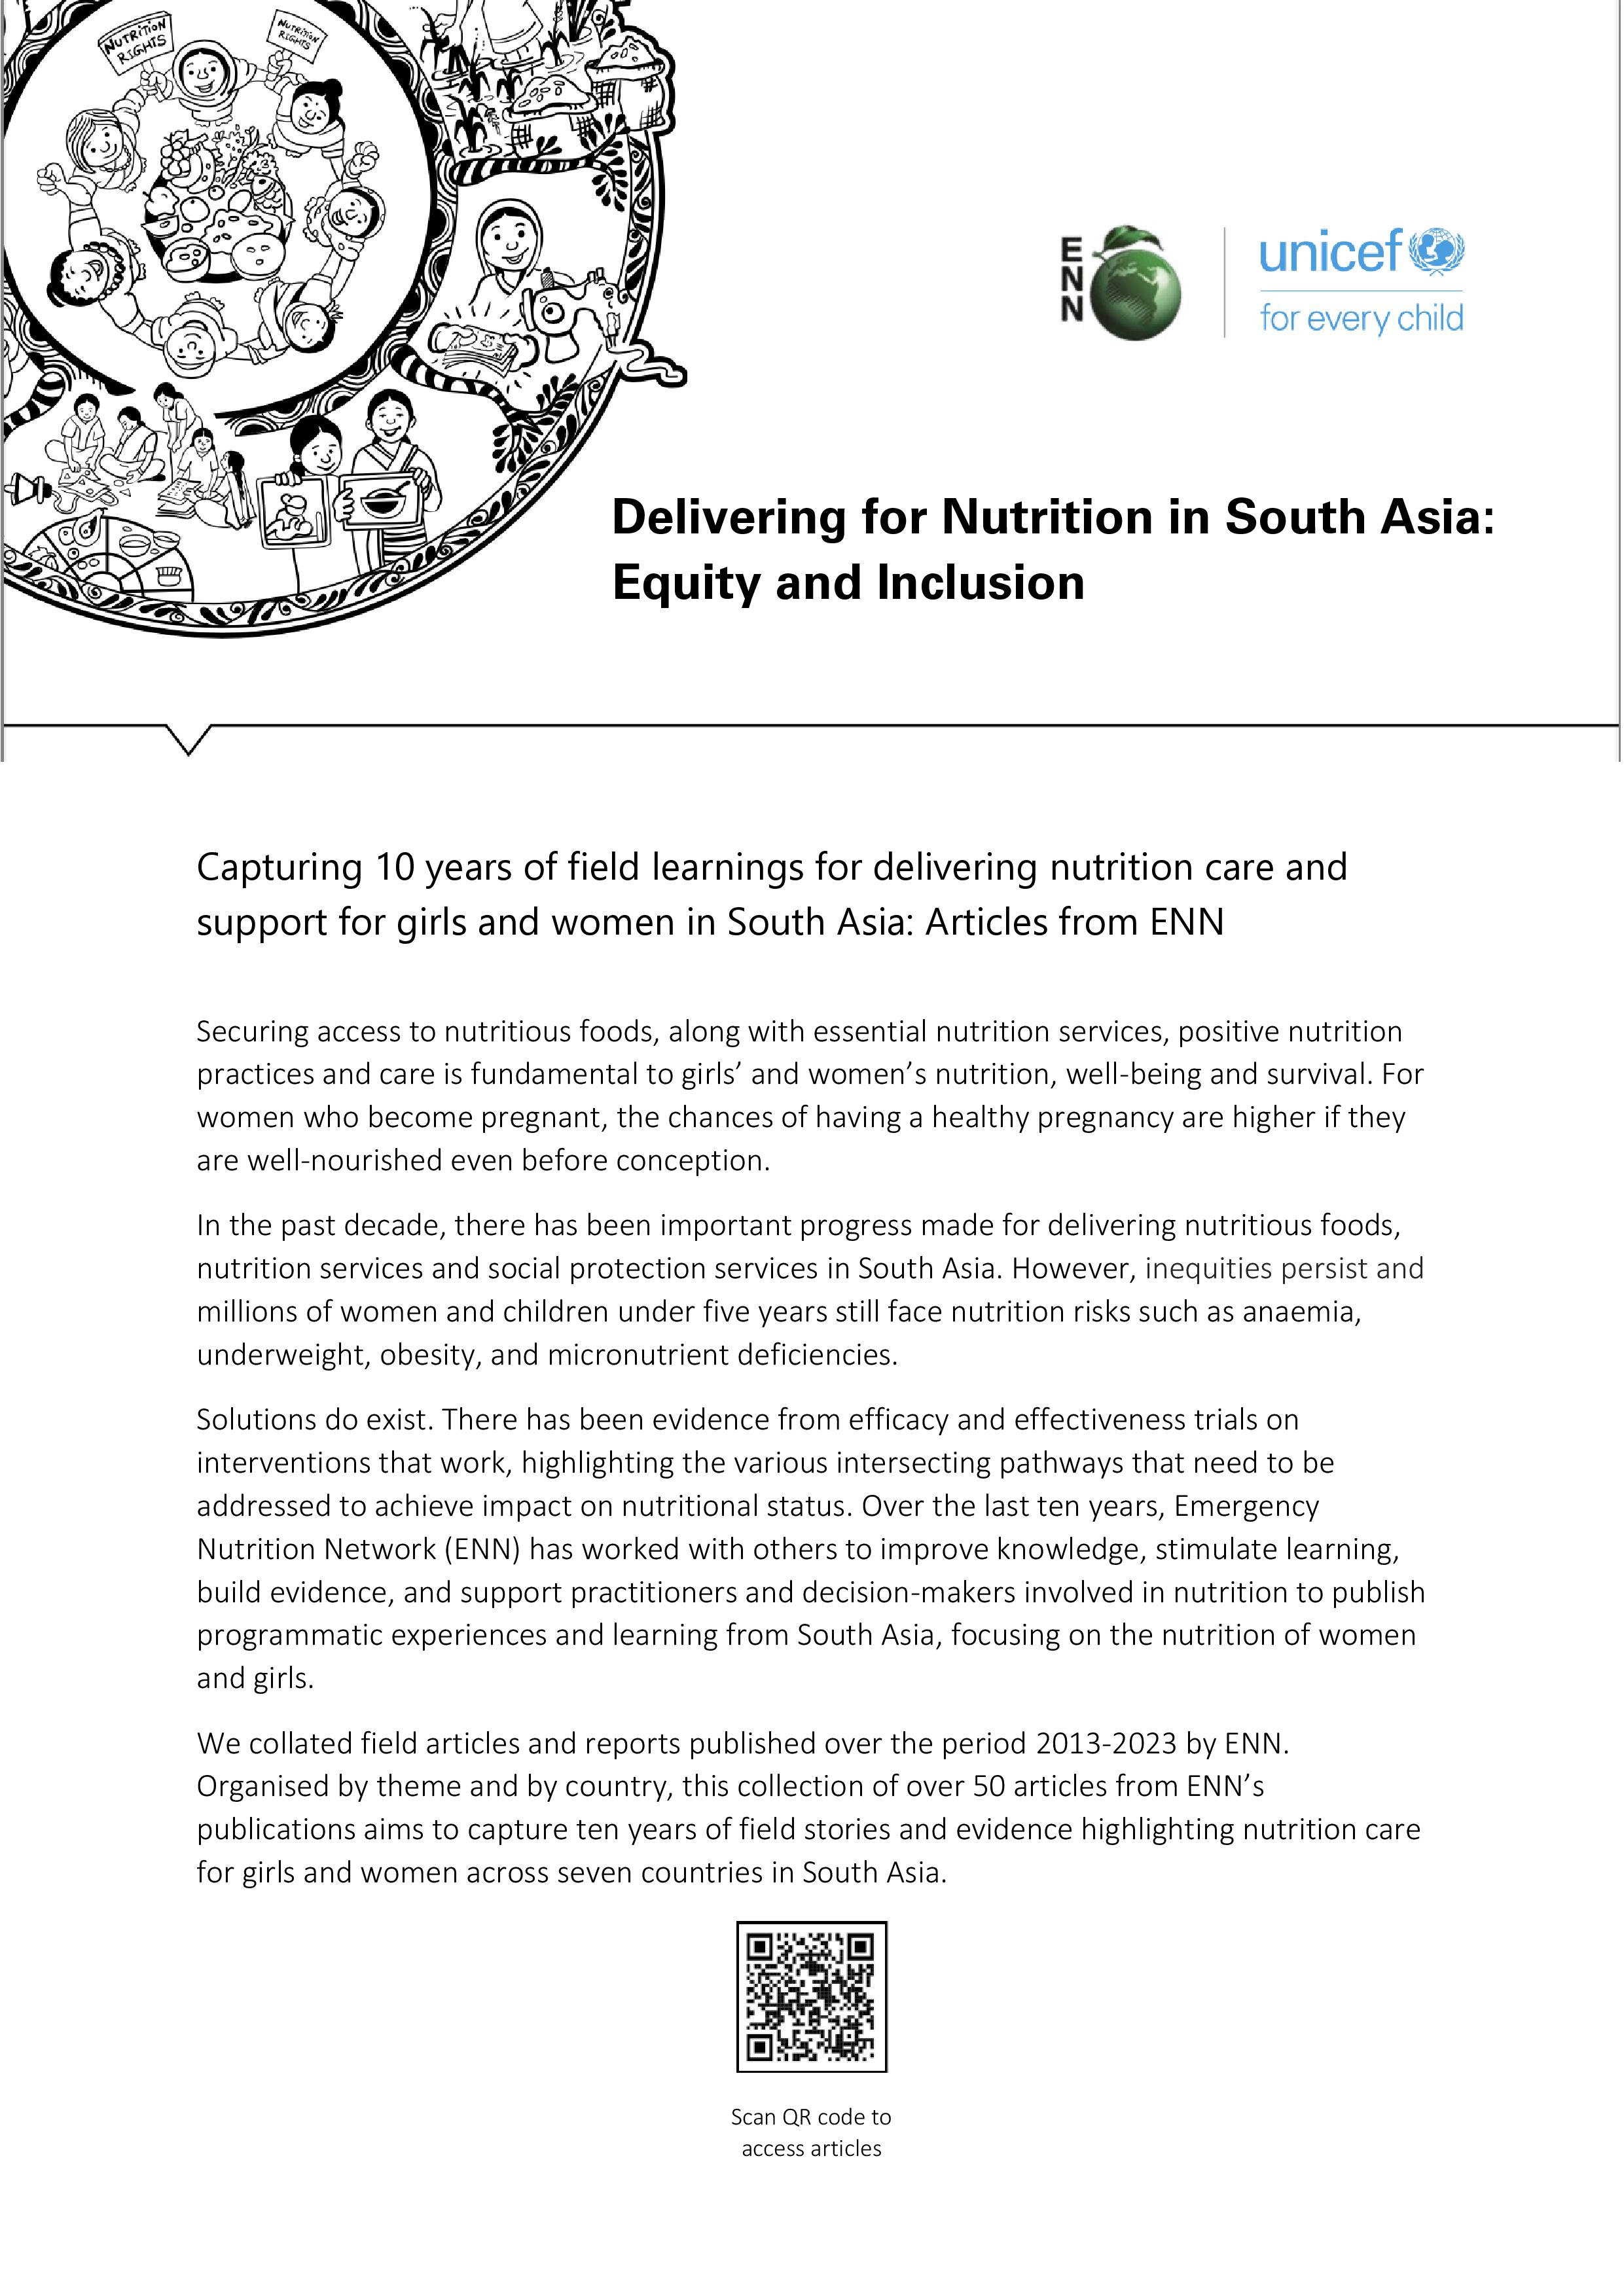 Delivering for Nutrition in South Asia: Equity and Inclusion document